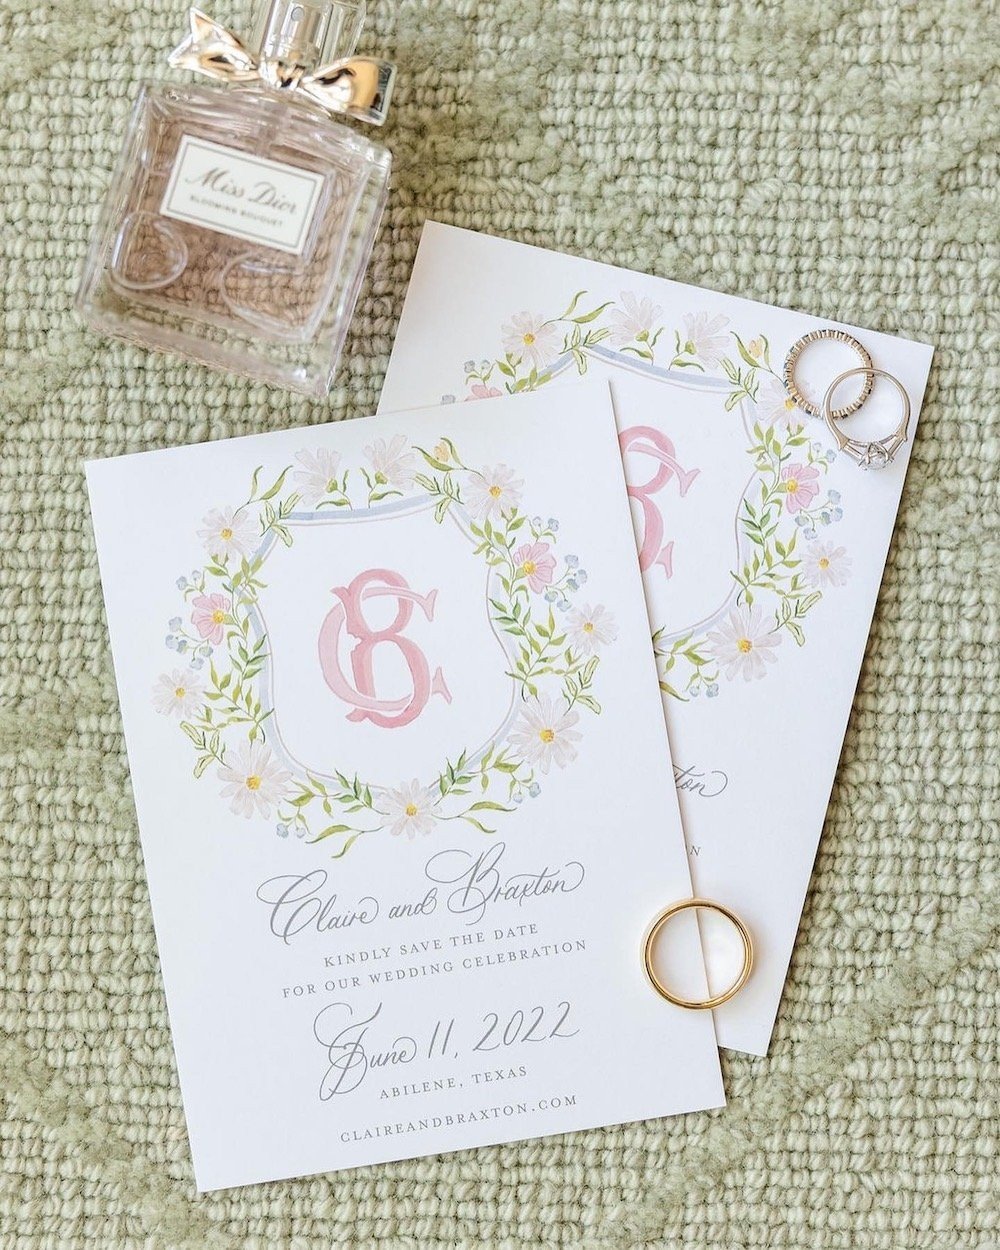 Happy Friday, loves! 💖 Today, I'm taking a moment to reflect on this stunning custom invitation. The vibrant colors breathe life into spring, and I'm absolutely smitten with the enchanting combination of pink and green hues. 🌸💚

⁠
#Calligraphy #Ha